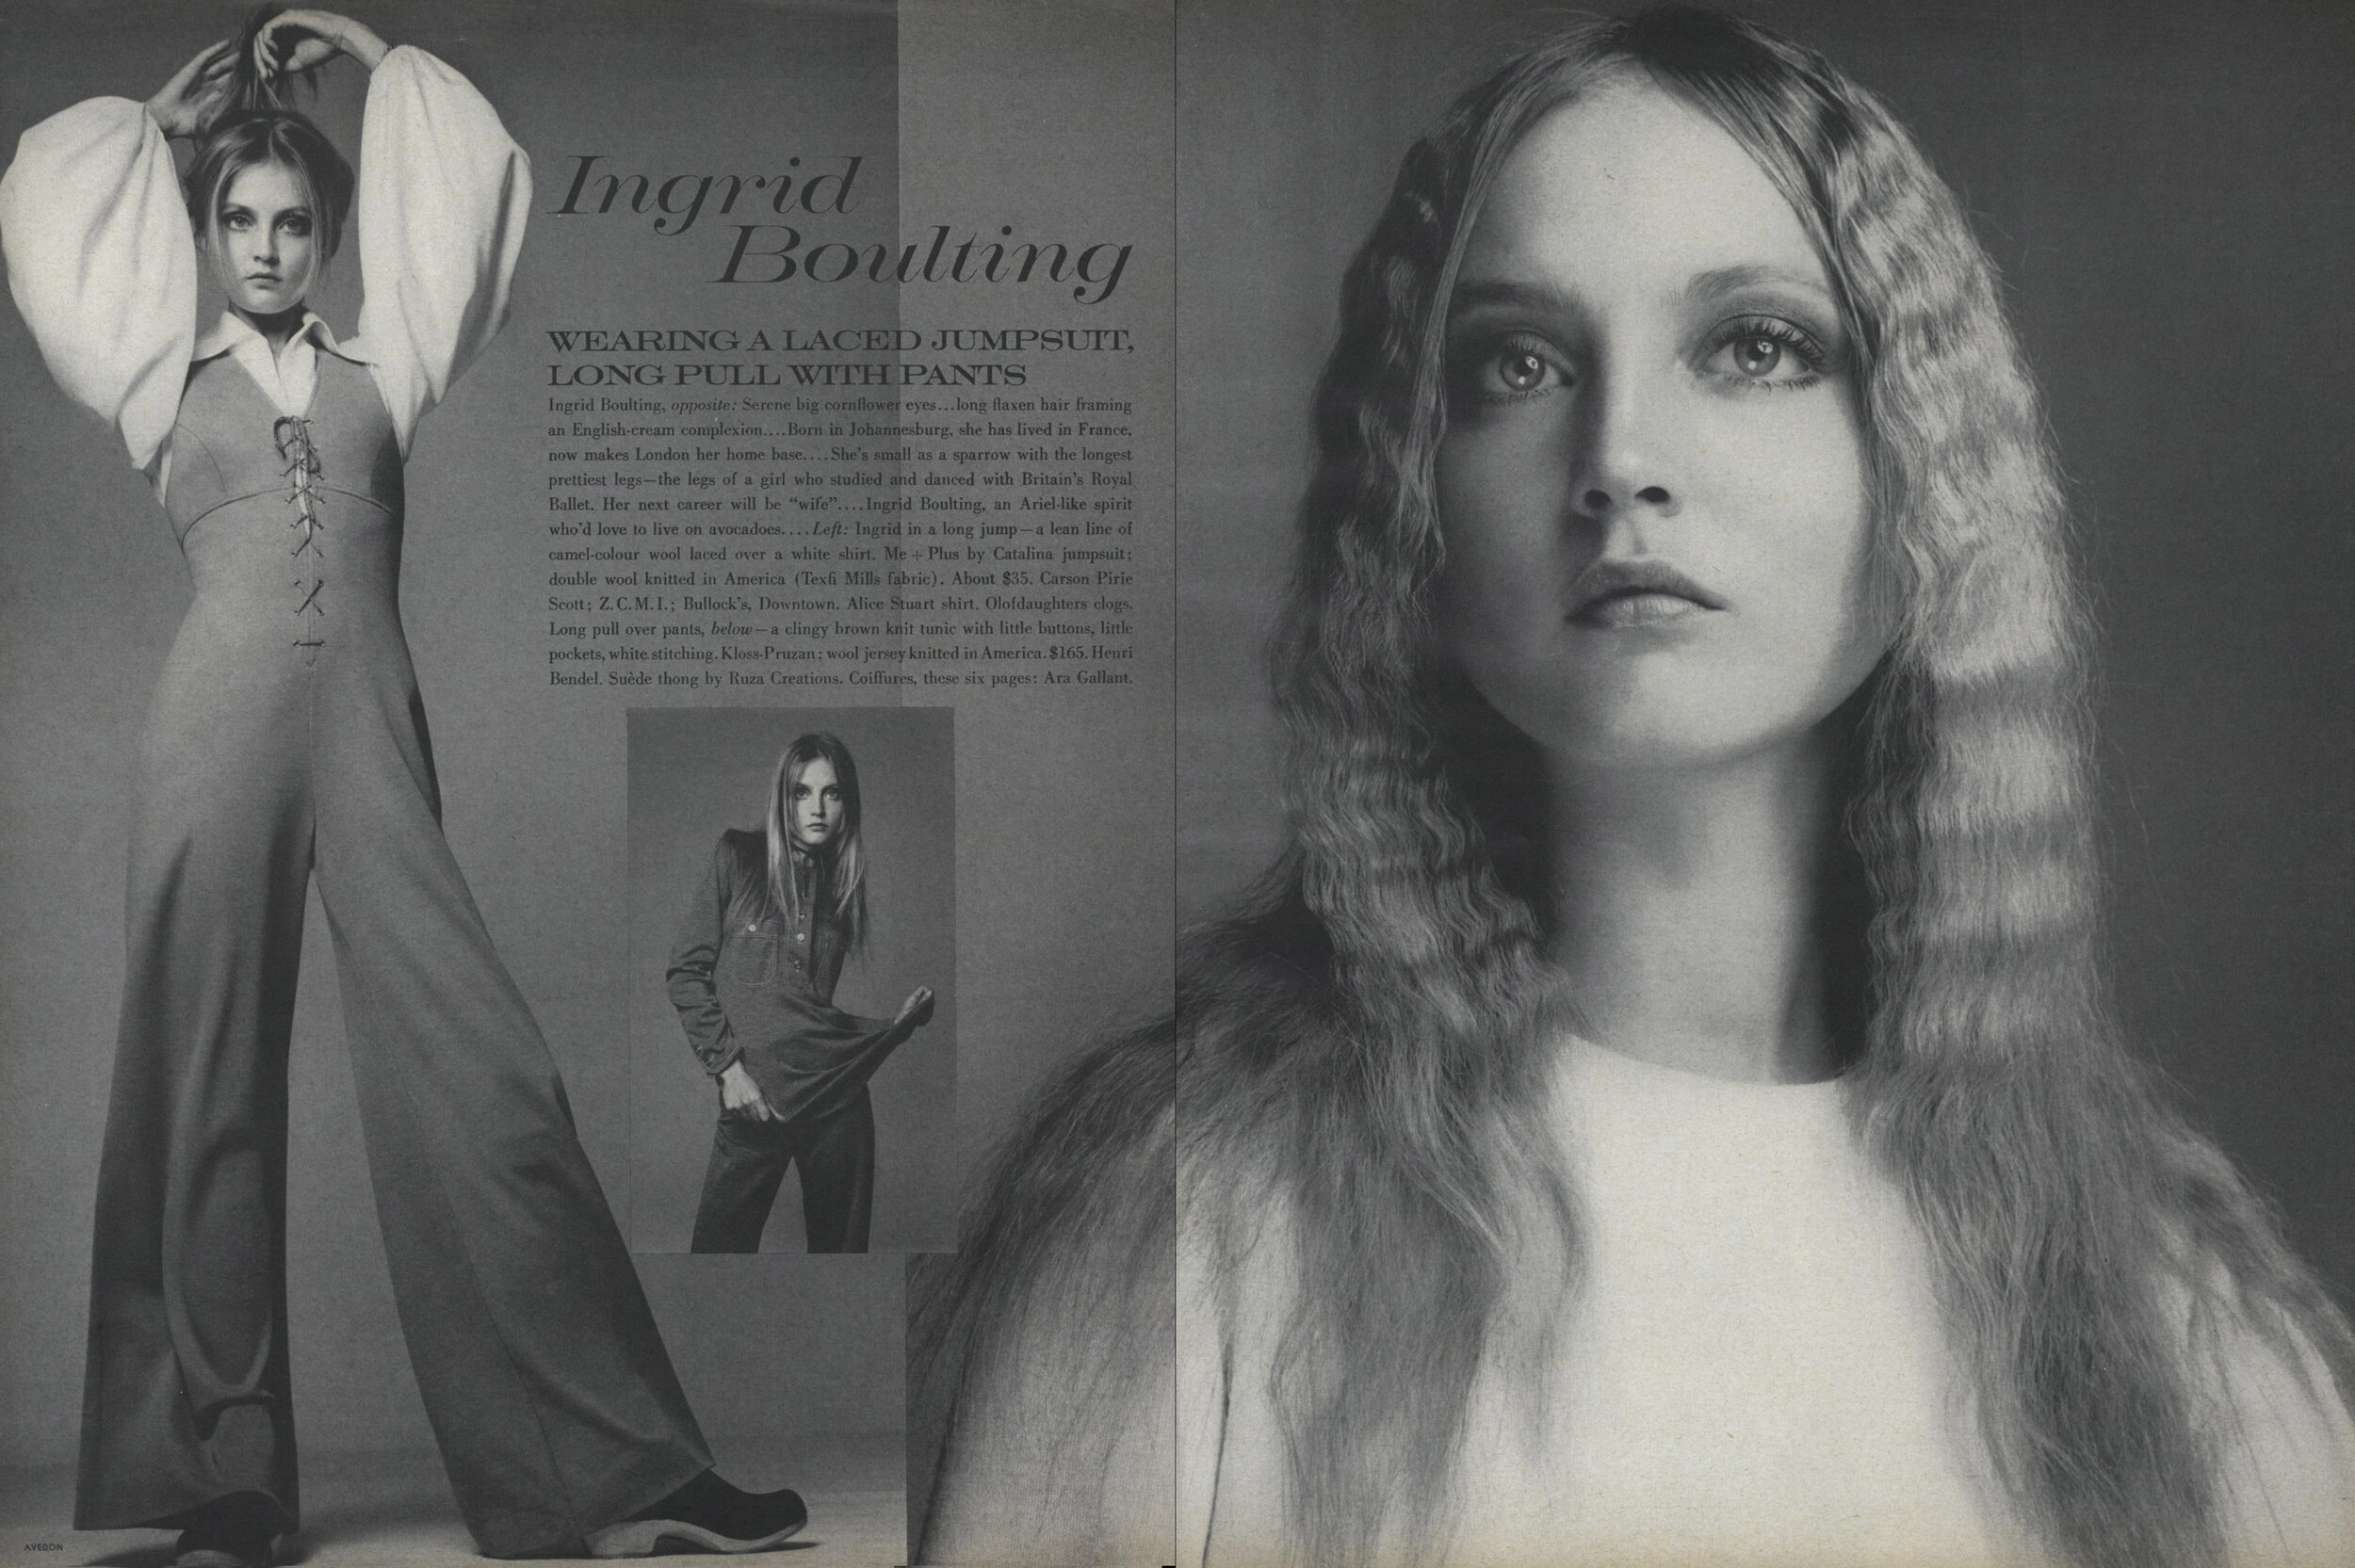 A spread from Vogue, October 15th, 1969. Shot by Richard Avedon.